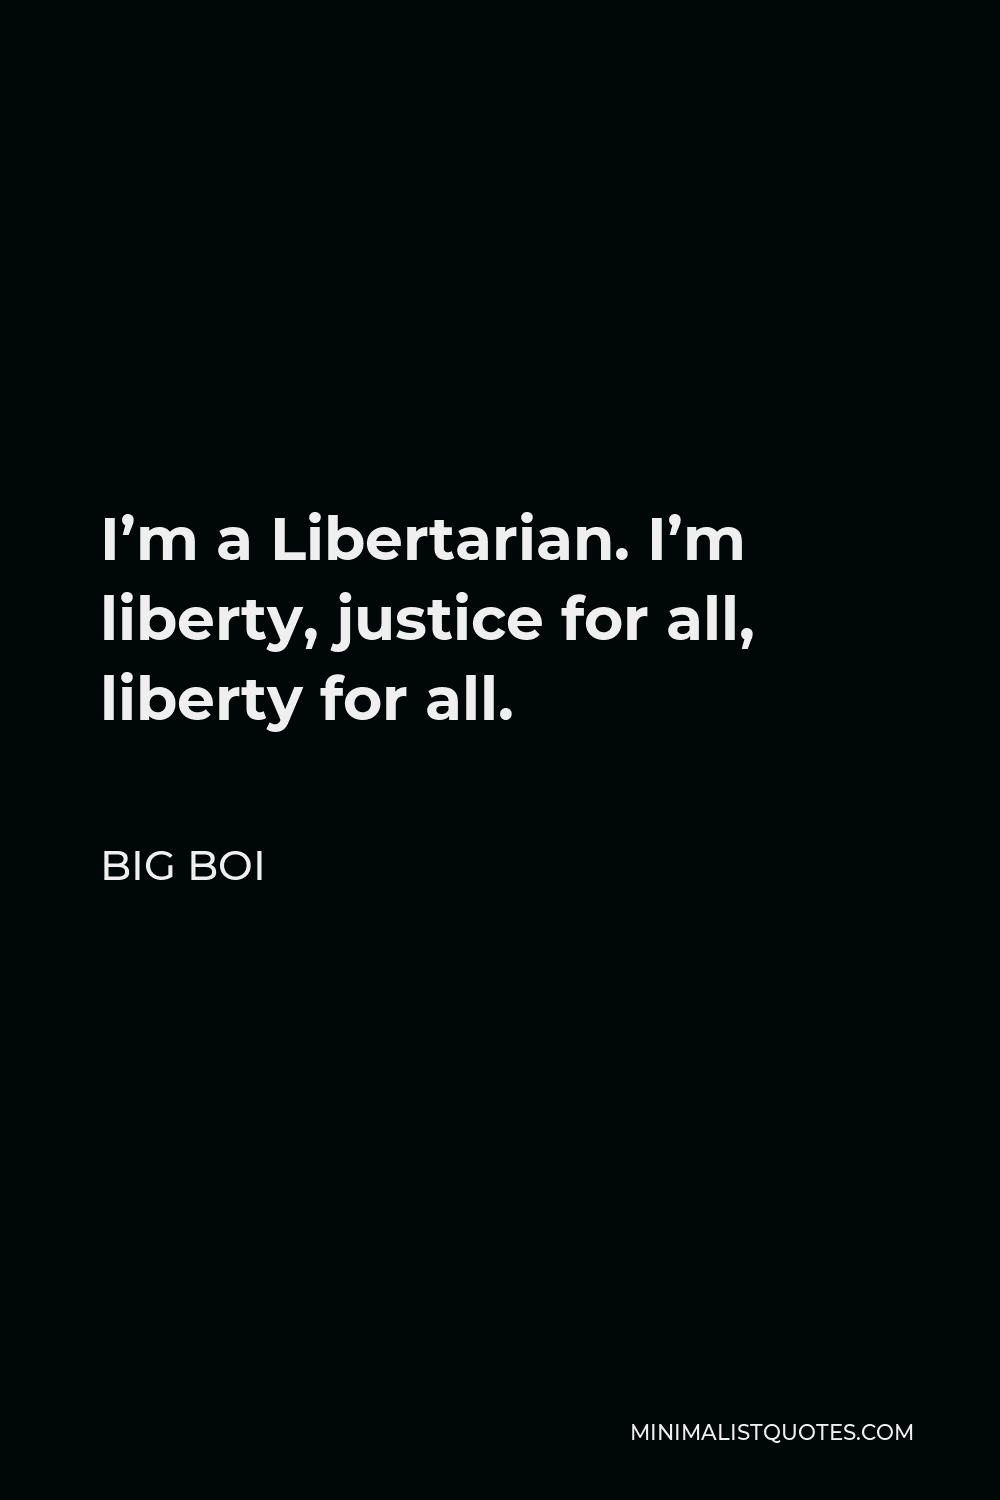 Big Boi Quote - I’m a Libertarian. I’m liberty, justice for all, liberty for all.